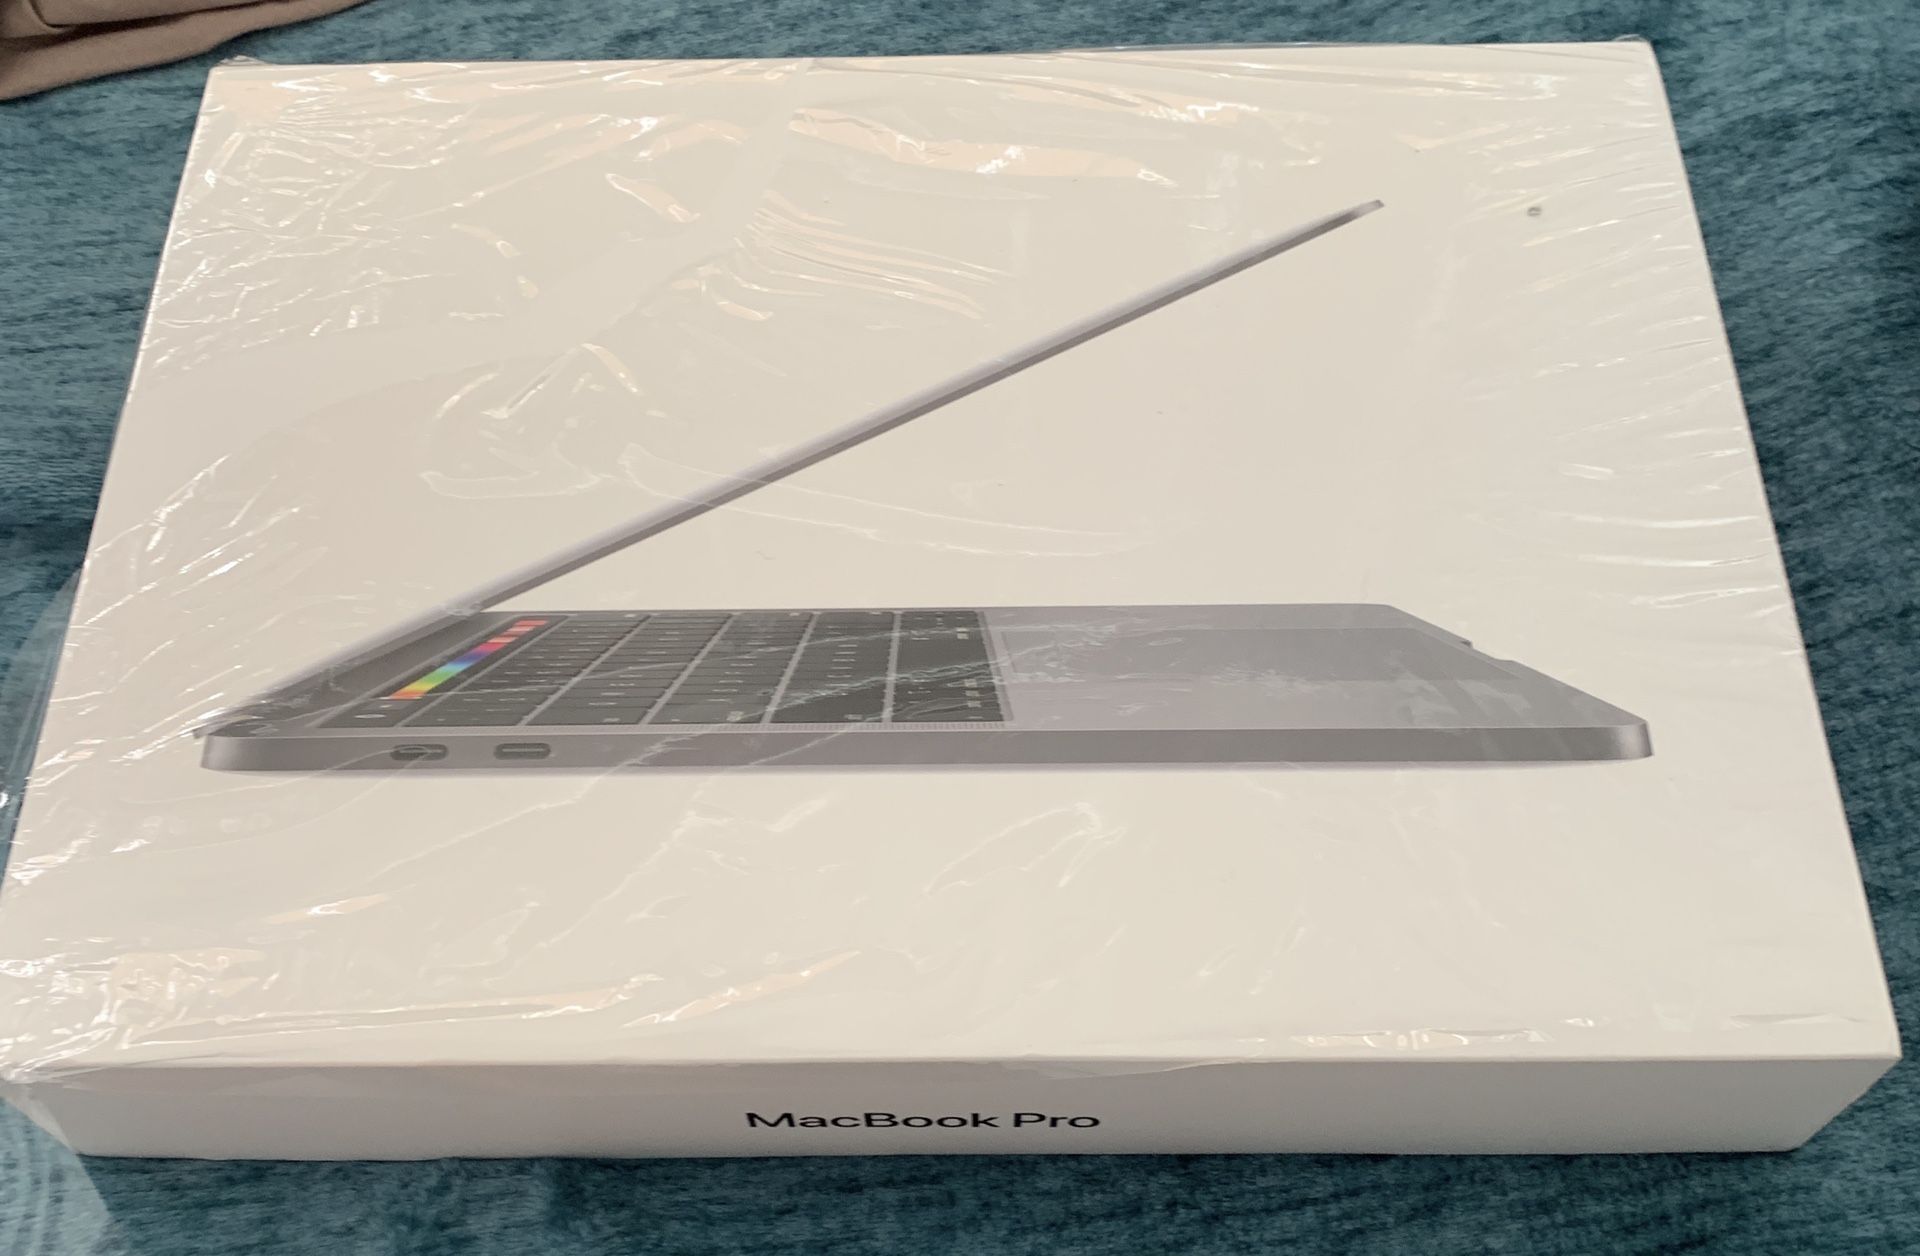 MacBook Pro 13-inch 2019 latest version (Space Gray) with touch bar